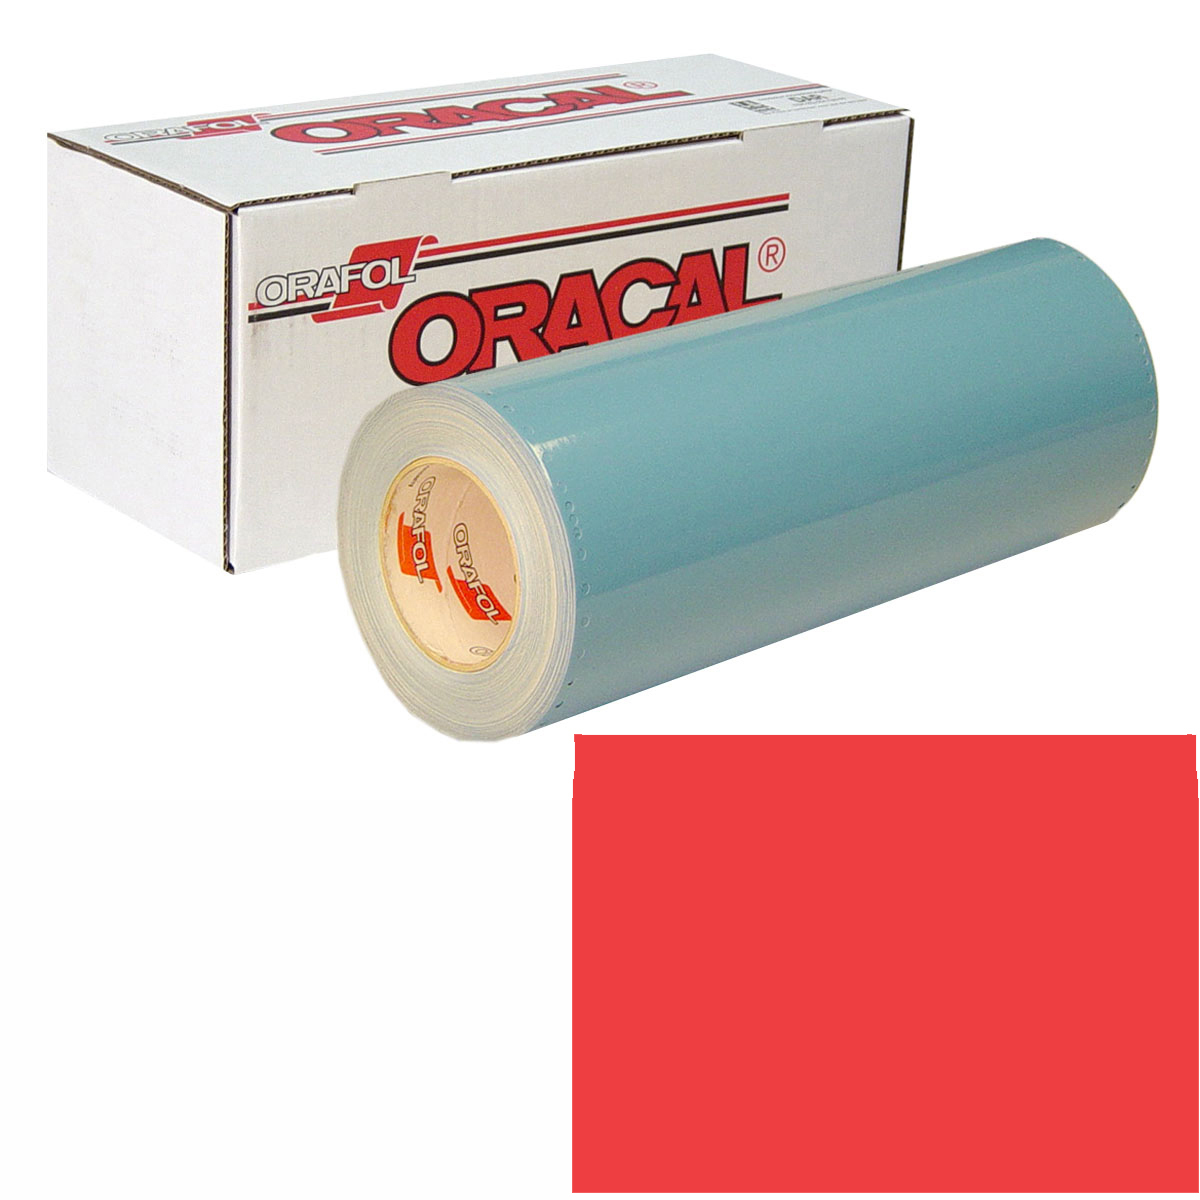 ORACAL 751 30in X 50yd 027 Tomato Red